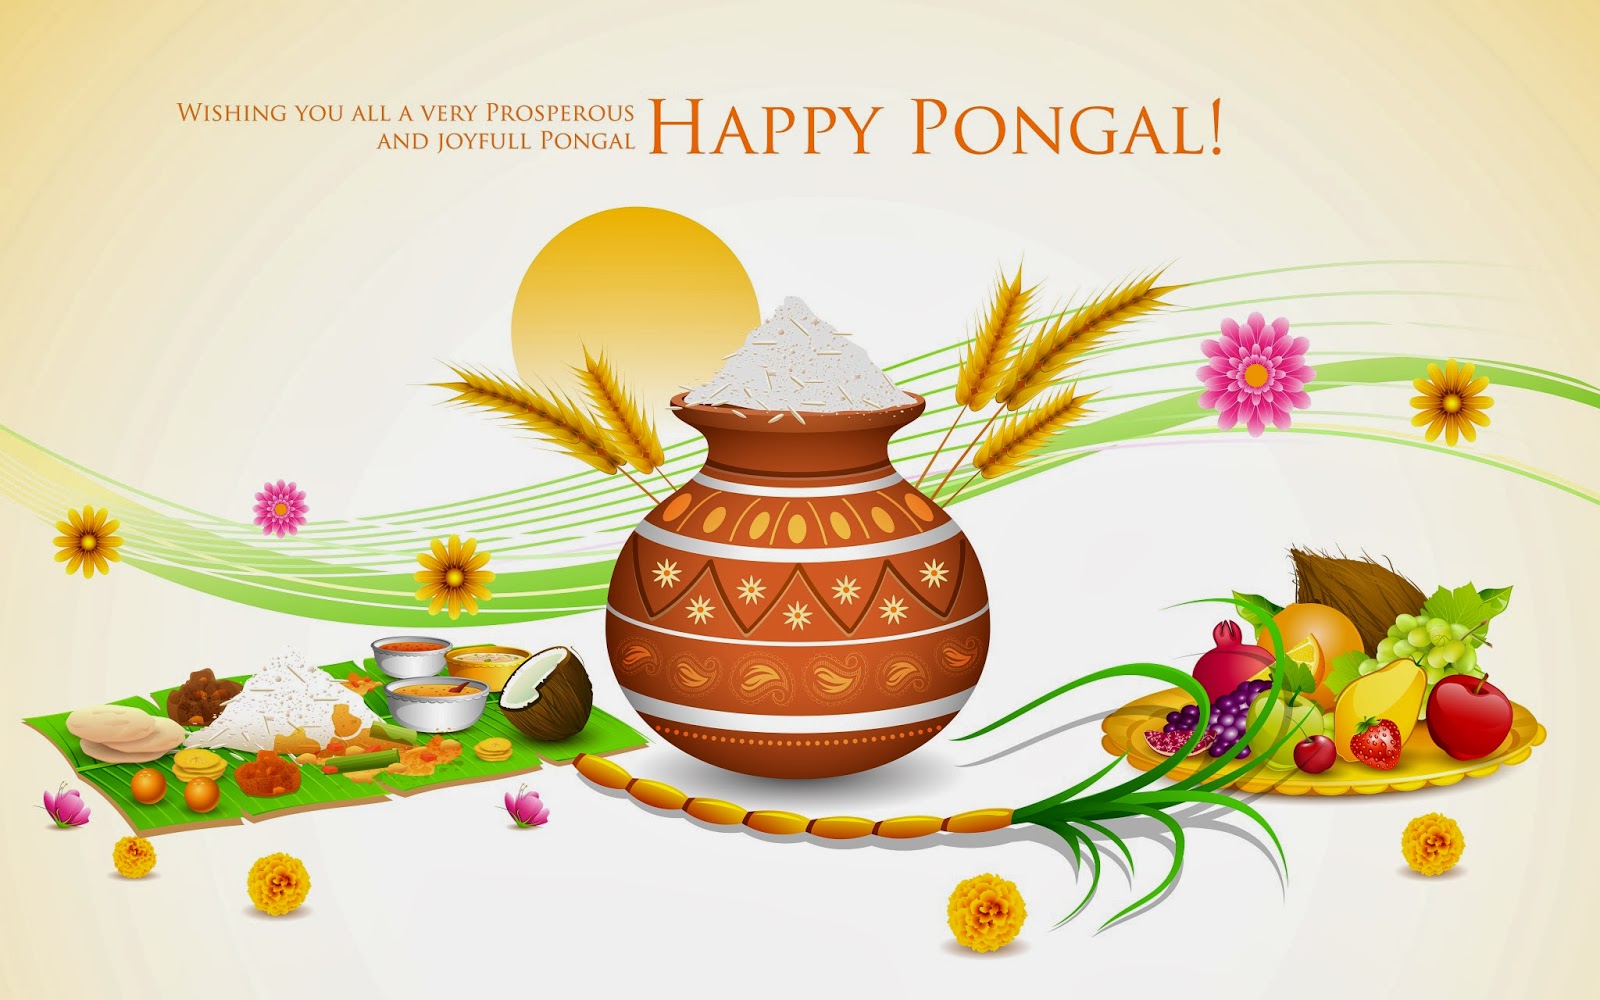 Pongal Festival Images Wallpapers - Happy Pongal Wishes In Tamil , HD Wallpaper & Backgrounds